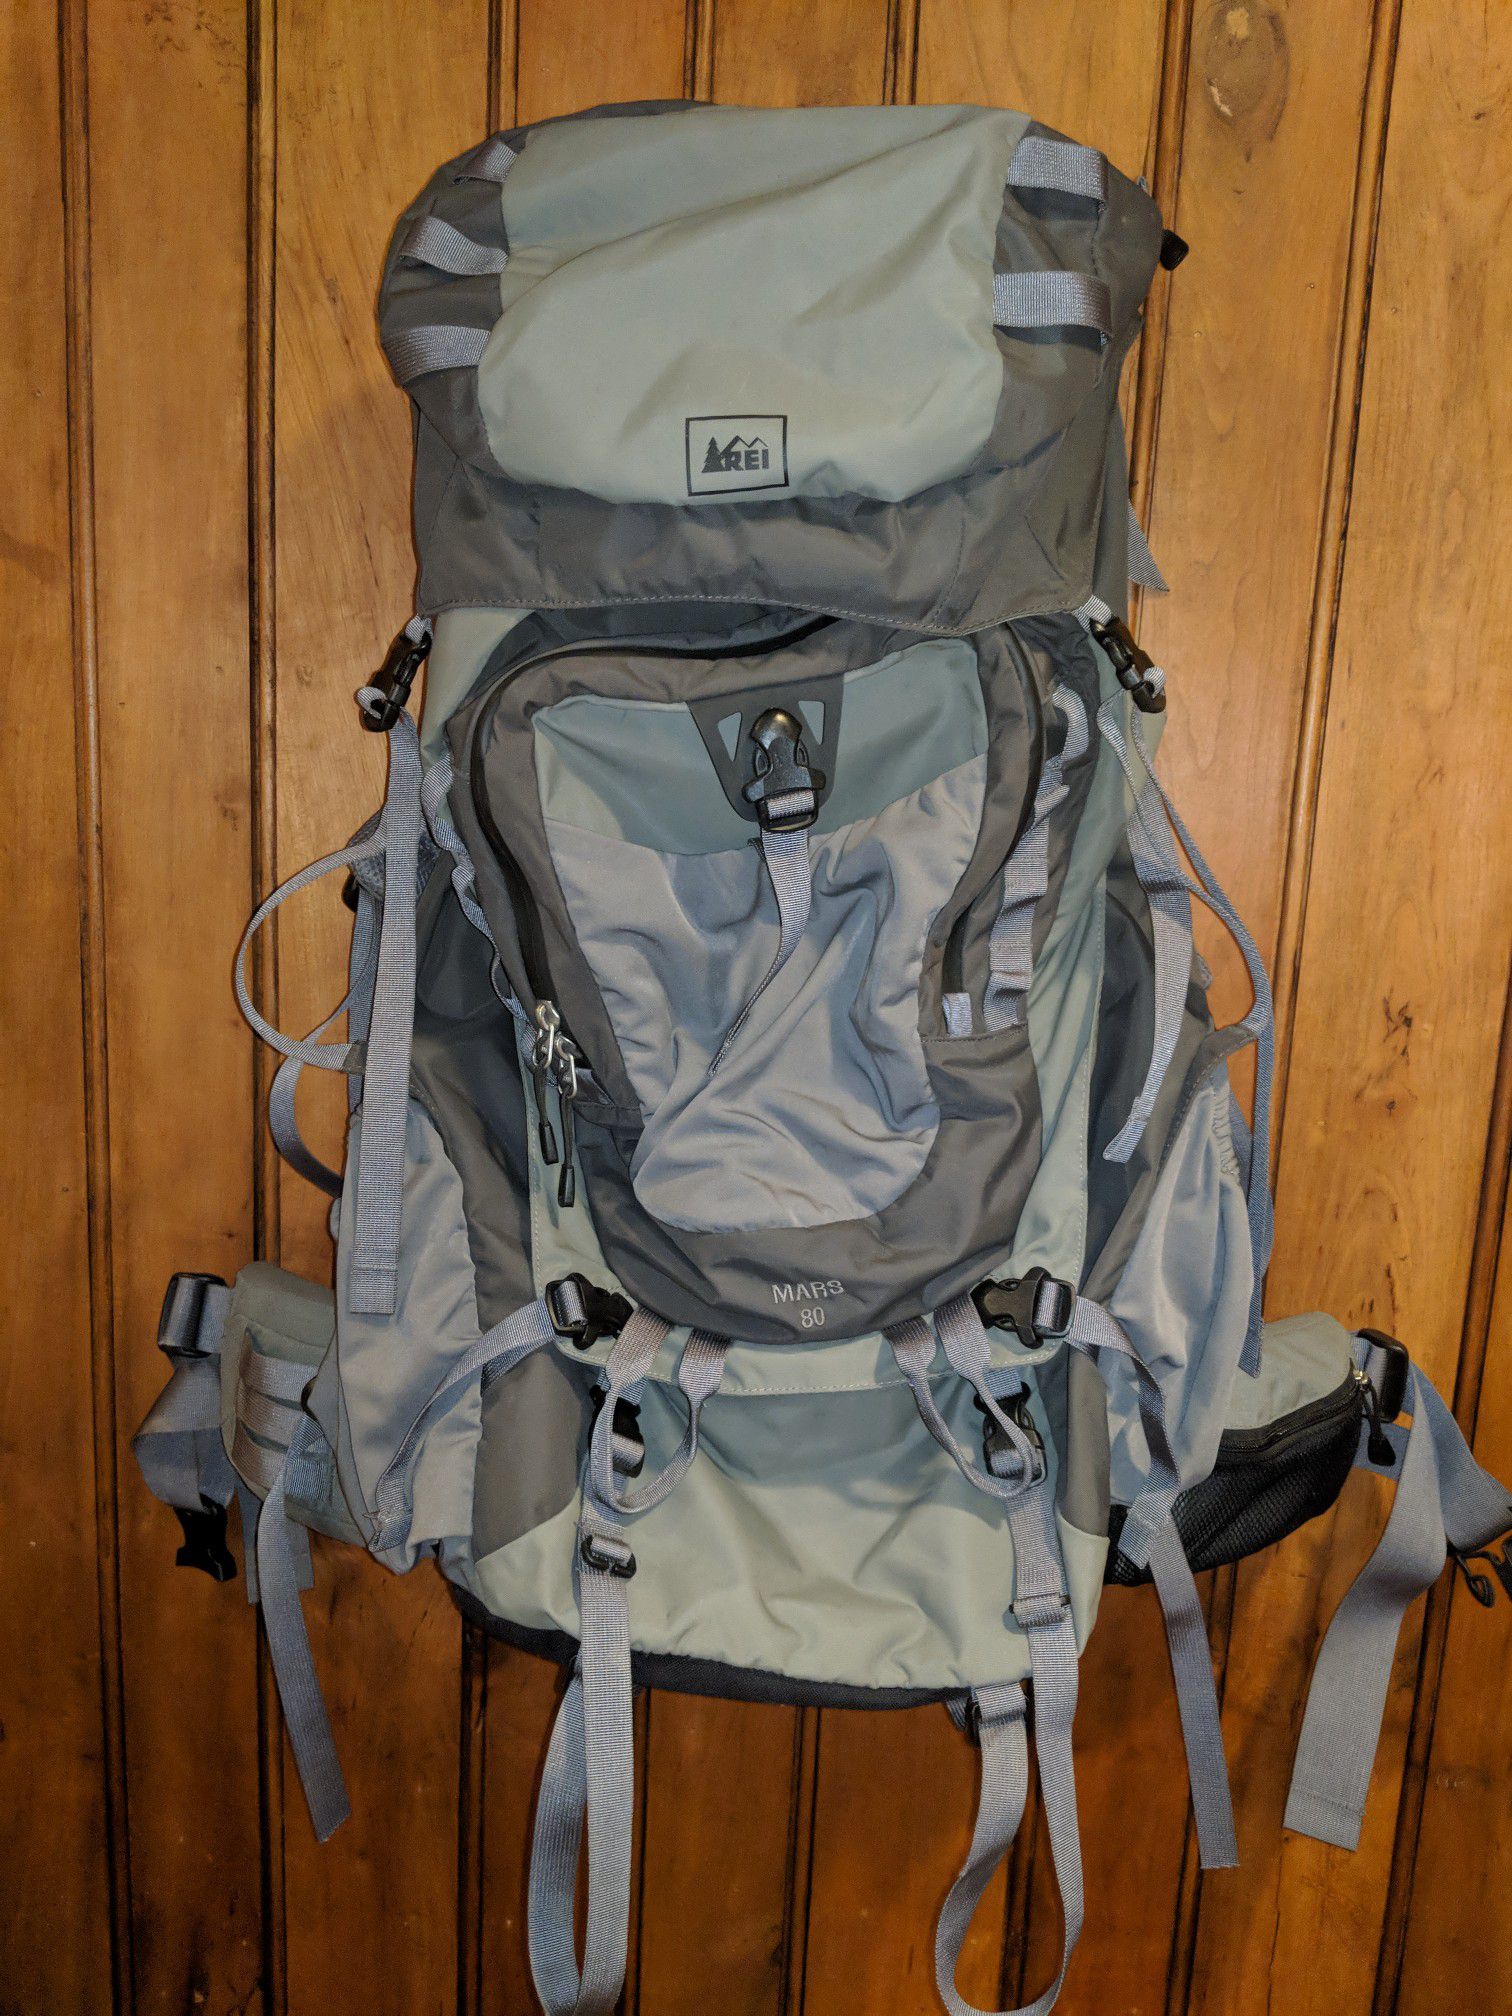 REI 80 liter hiking or backpacking backpack